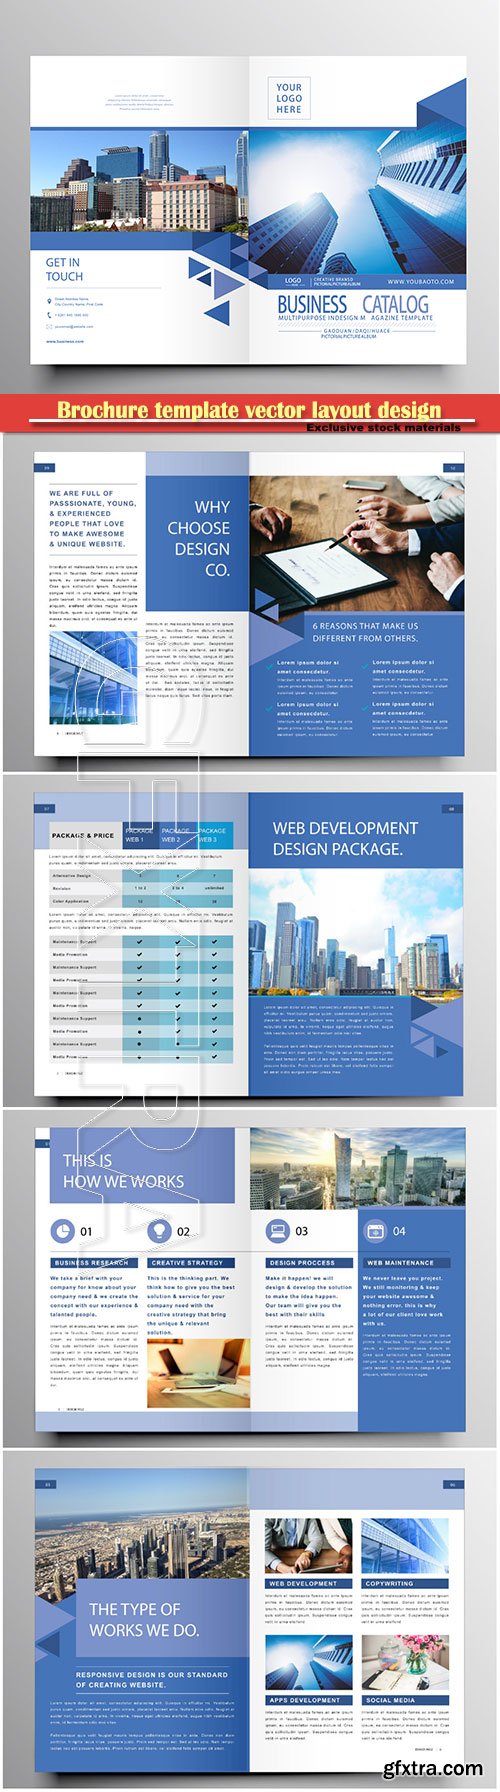 Brochure template vector layout design, corporate business annual report, magazine, flyer mockup # 184